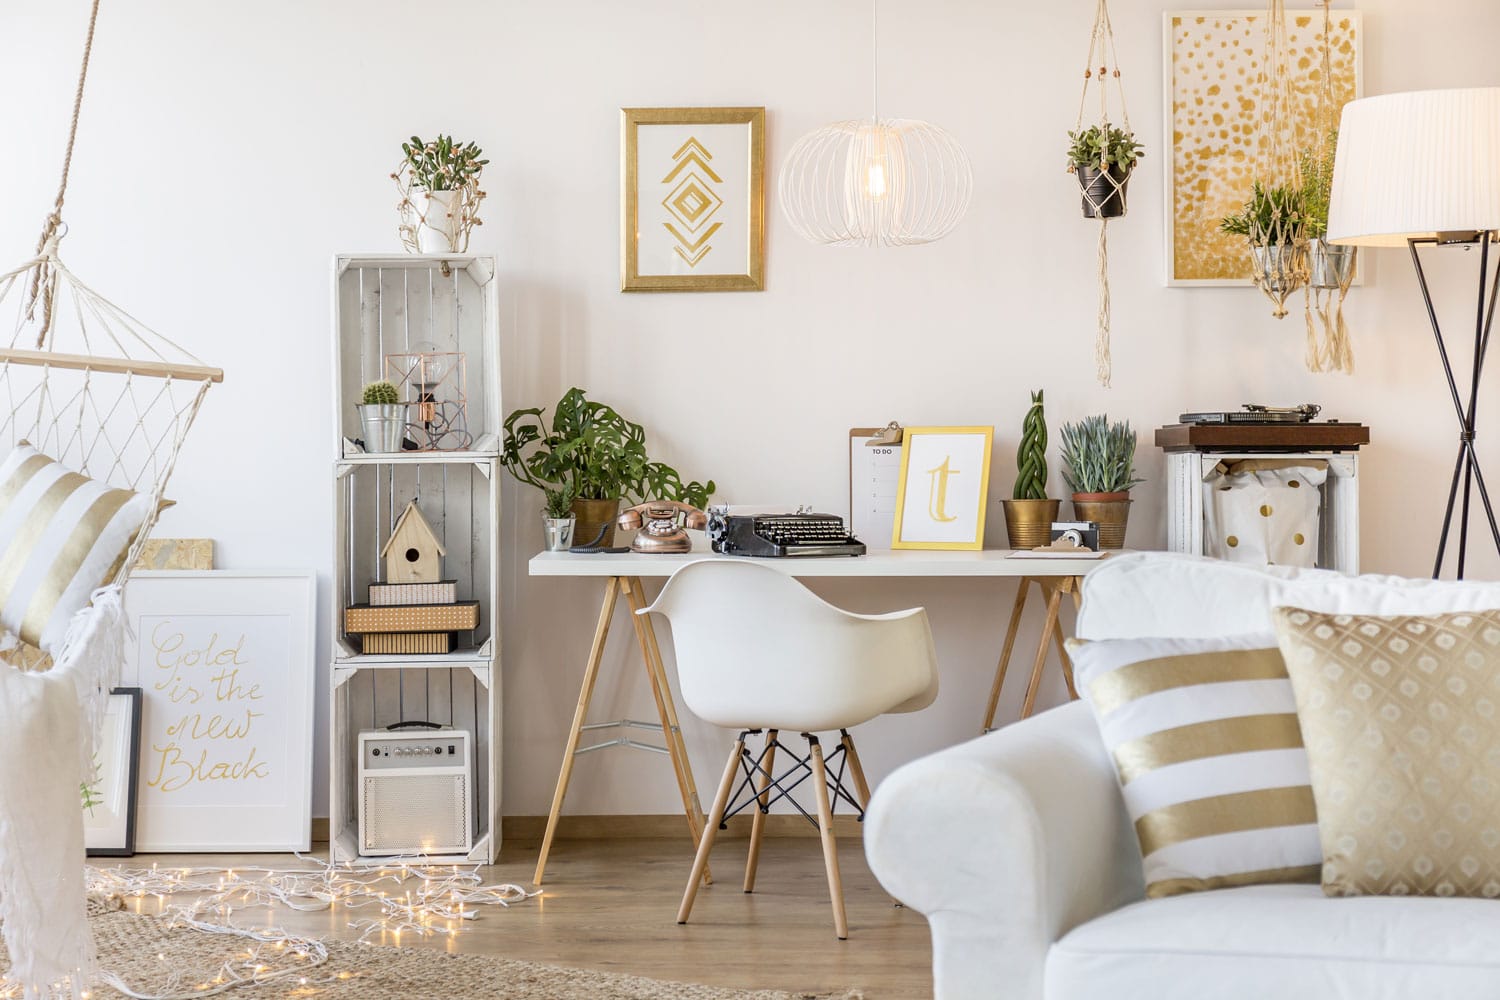 Apartment decorated in white and gold furniture